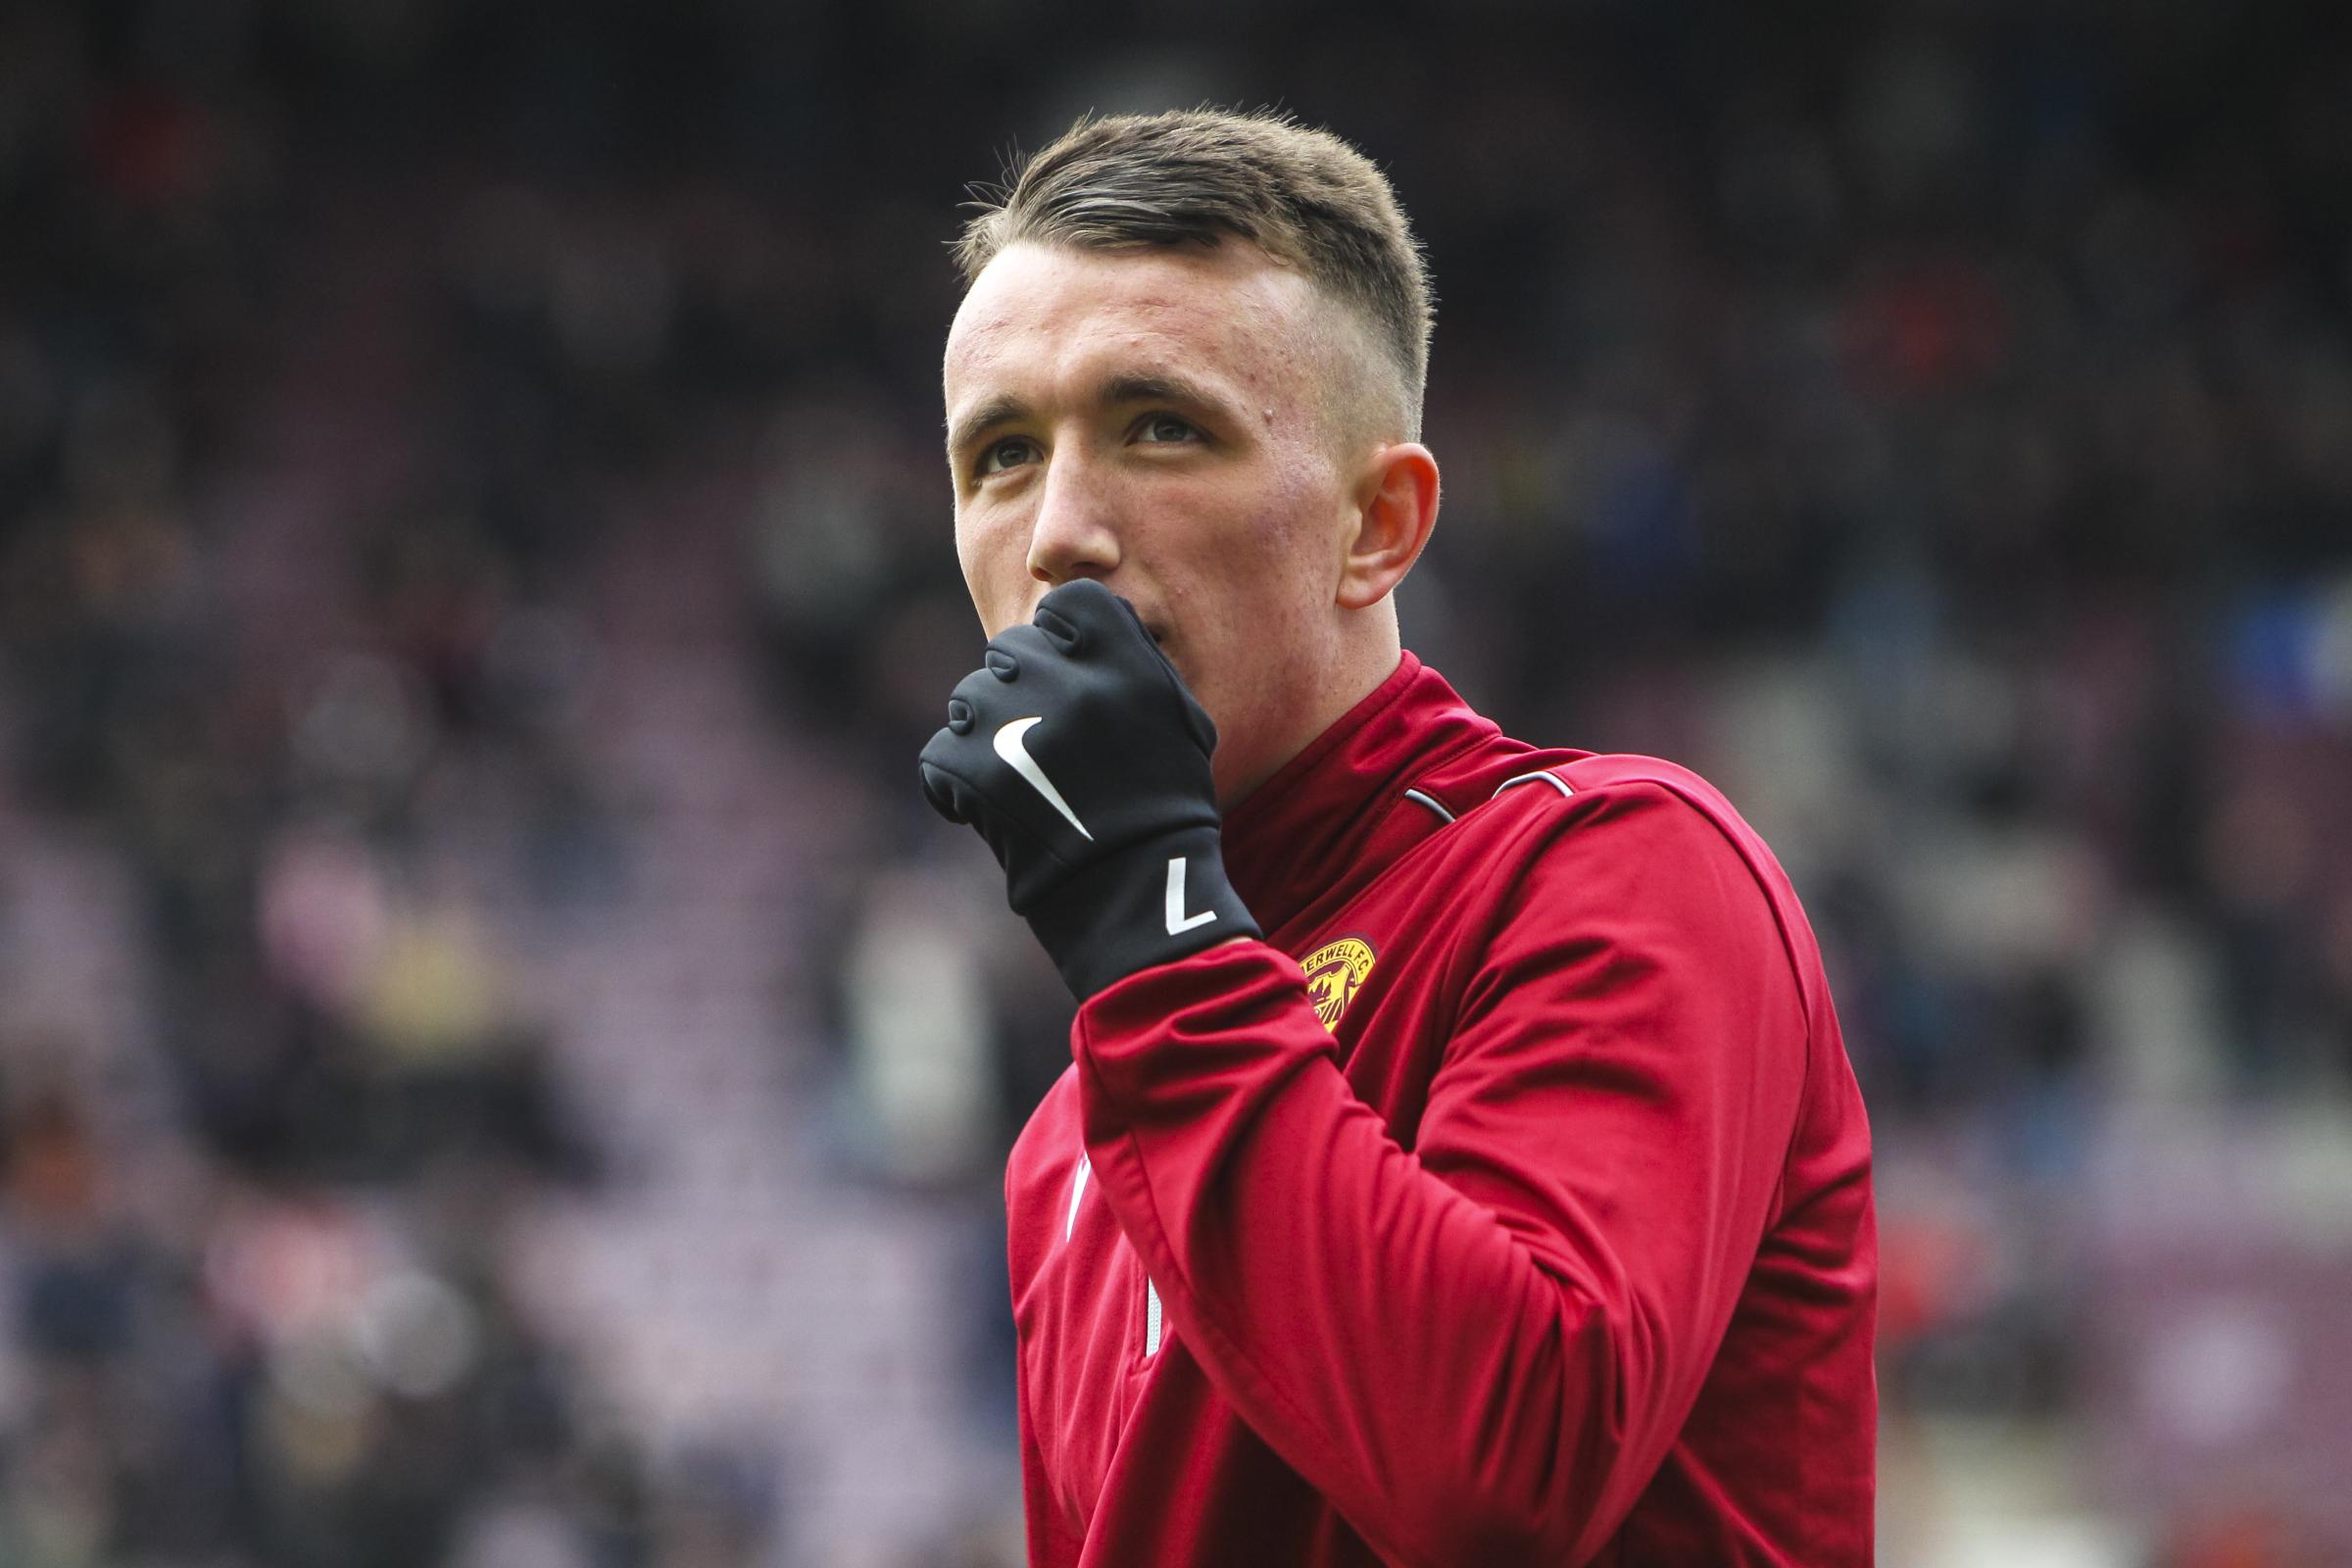 David Turnbull vows to prove he's same £3m player after breakthrough season and repay Motherwell